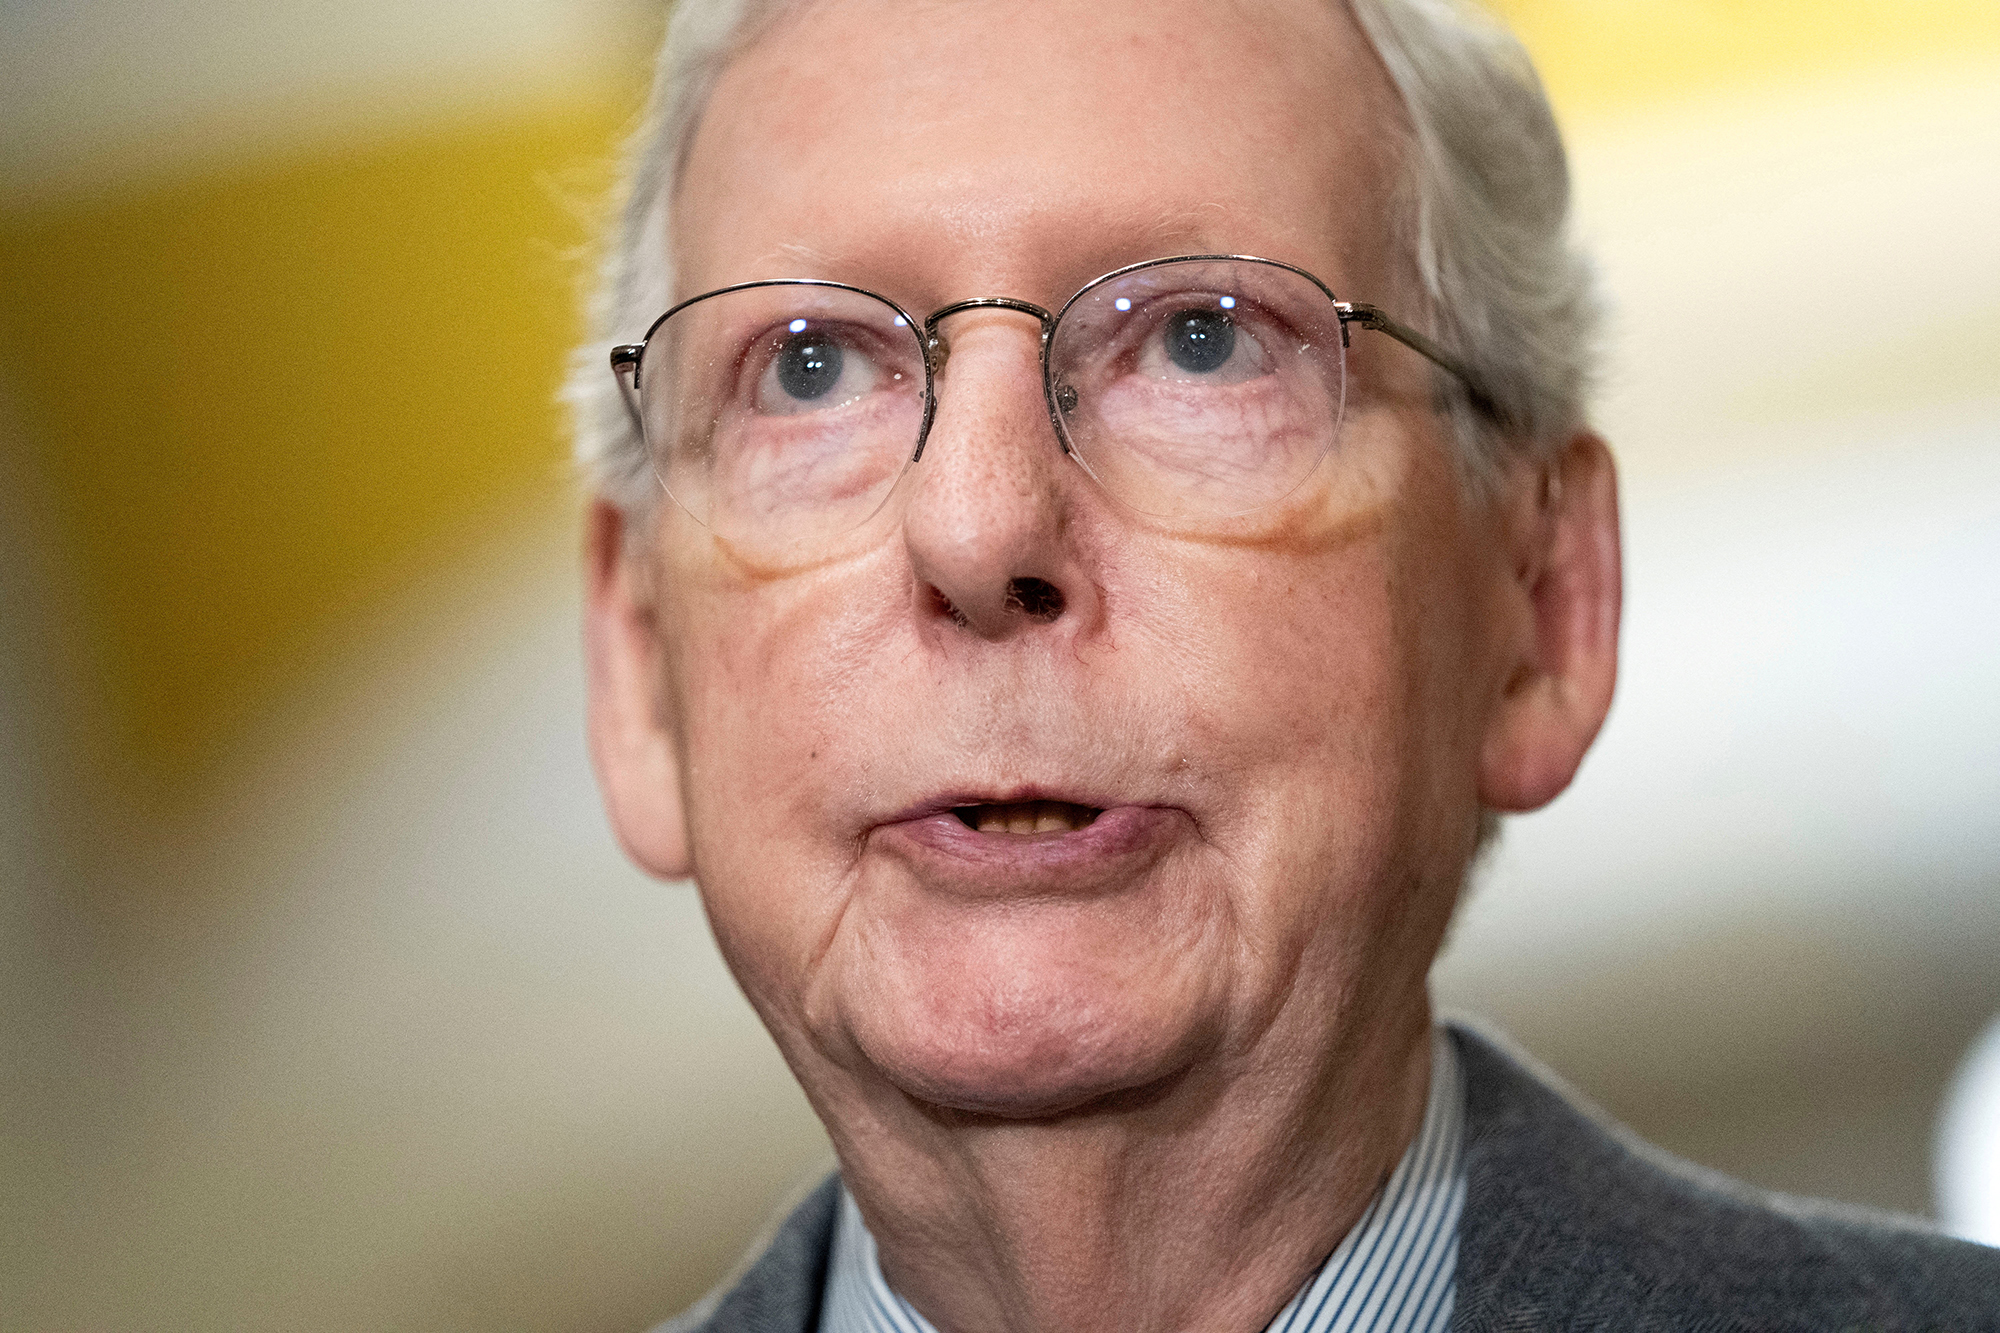 U.S. Senate Minority Leader Mitch McConnell speaks with reporters following the Senate Republicans weekly policy lunch on Capitol Hill in Washington D.C, on March 6.